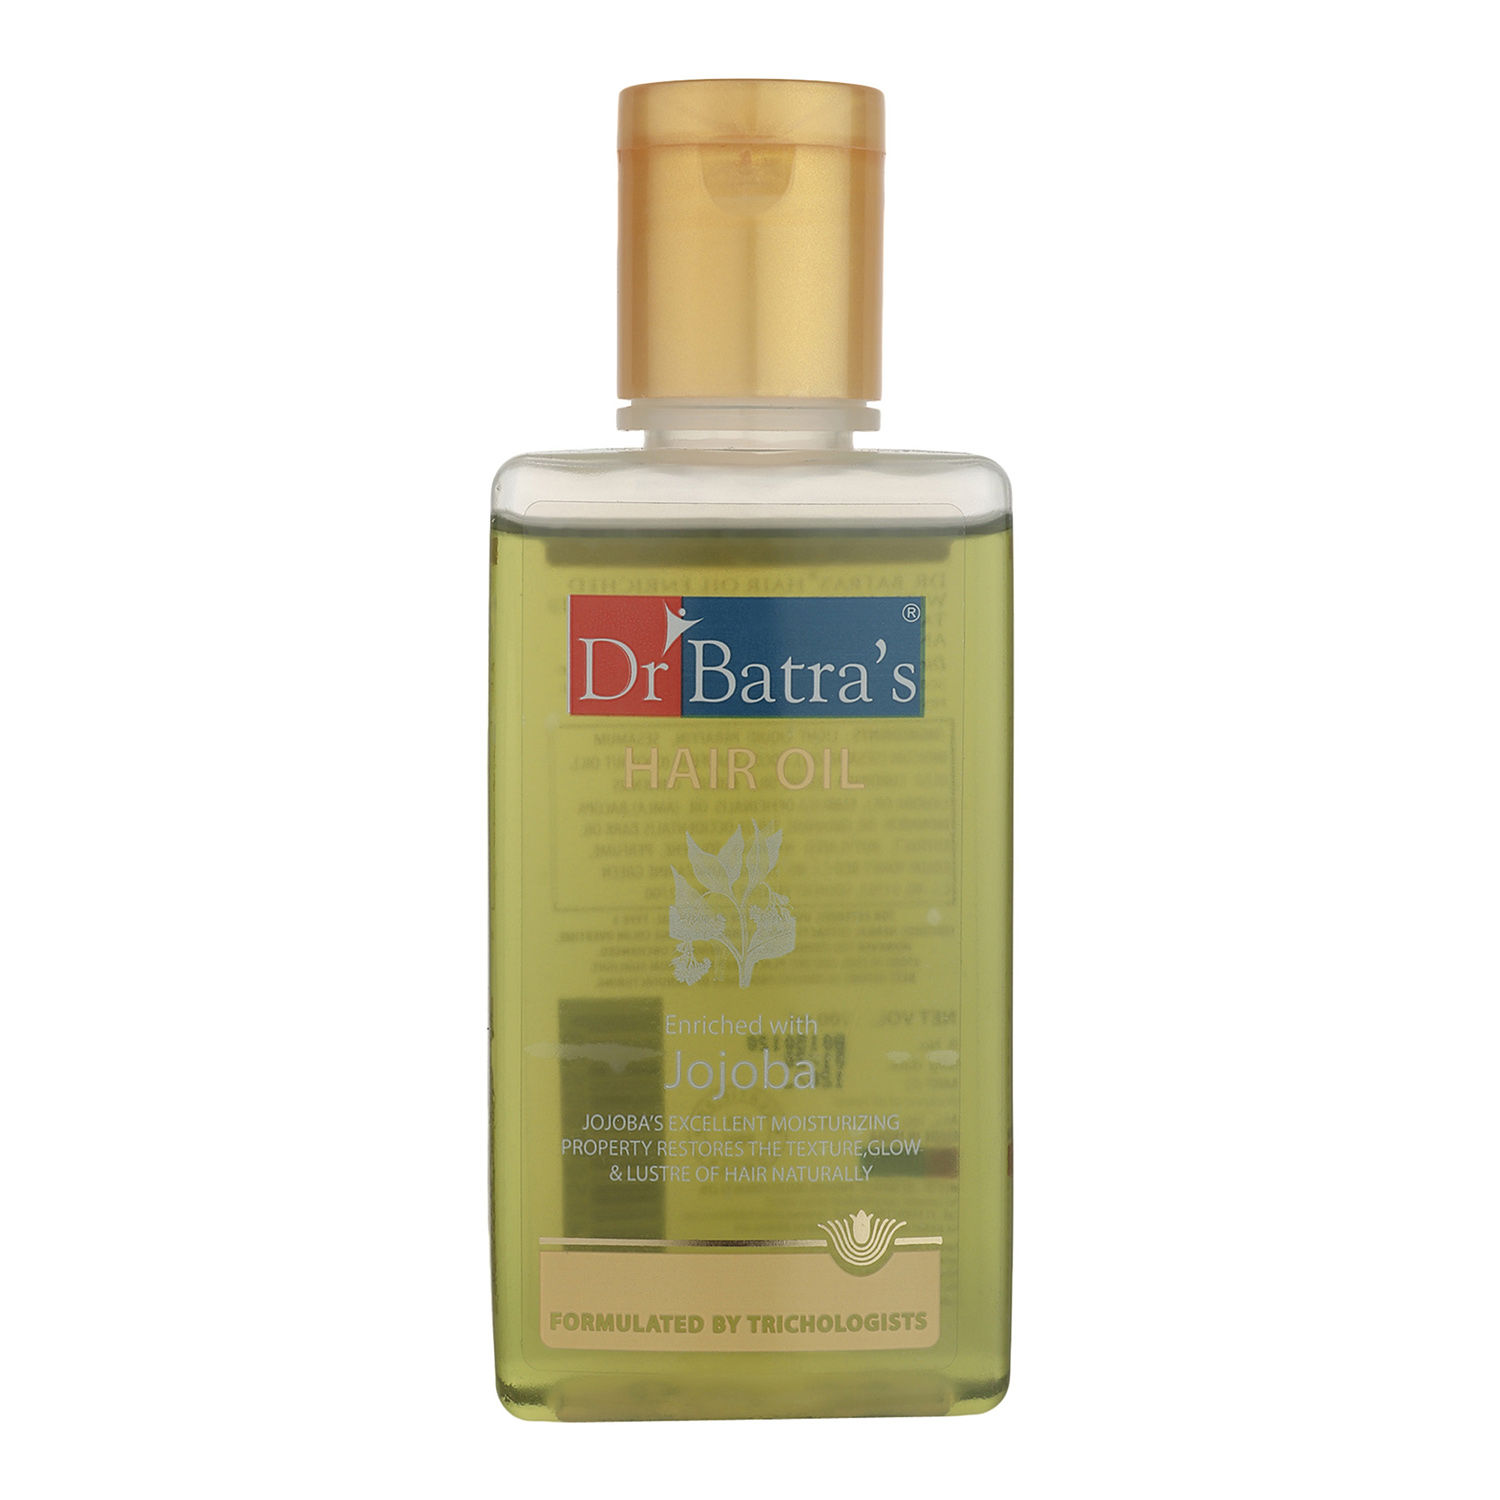 Dr Batra's Hair Oil Enriched With Jojoba